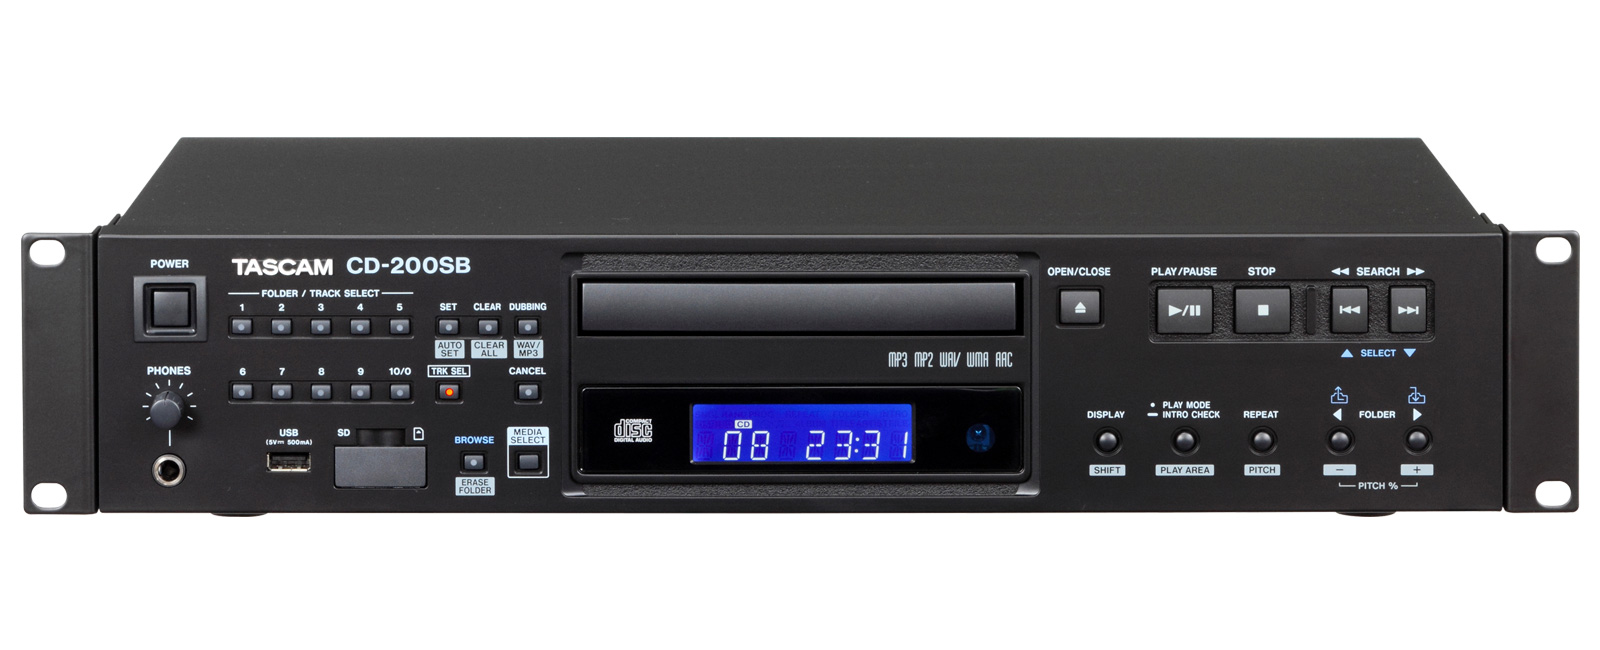 CD-200SB | SPECIFICATIONS | TASCAM - United States